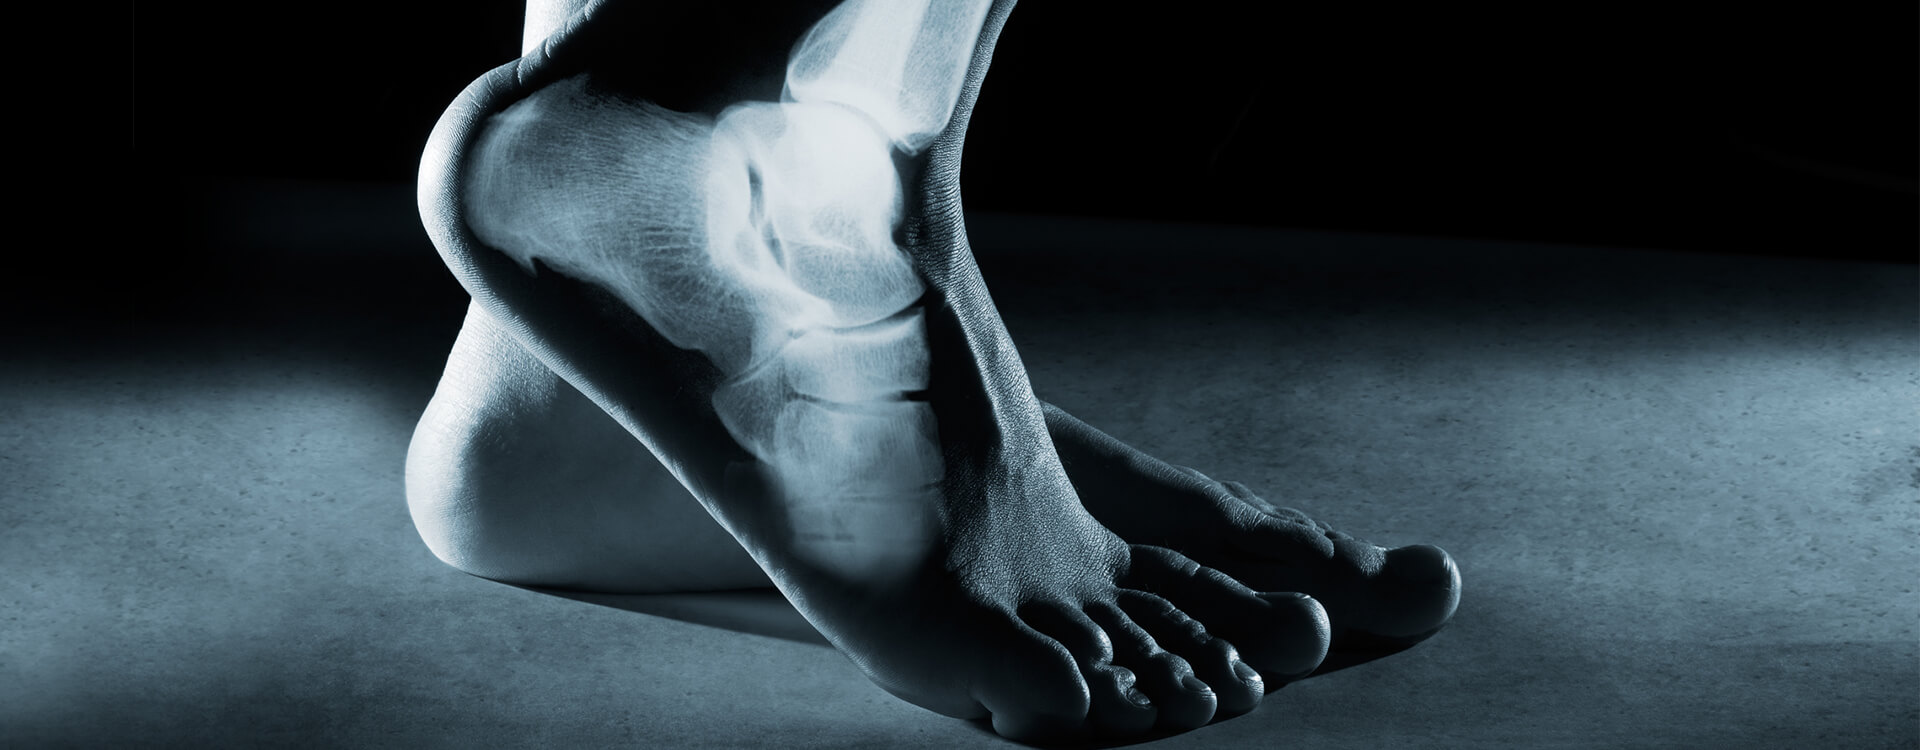 ankle digital x-ray